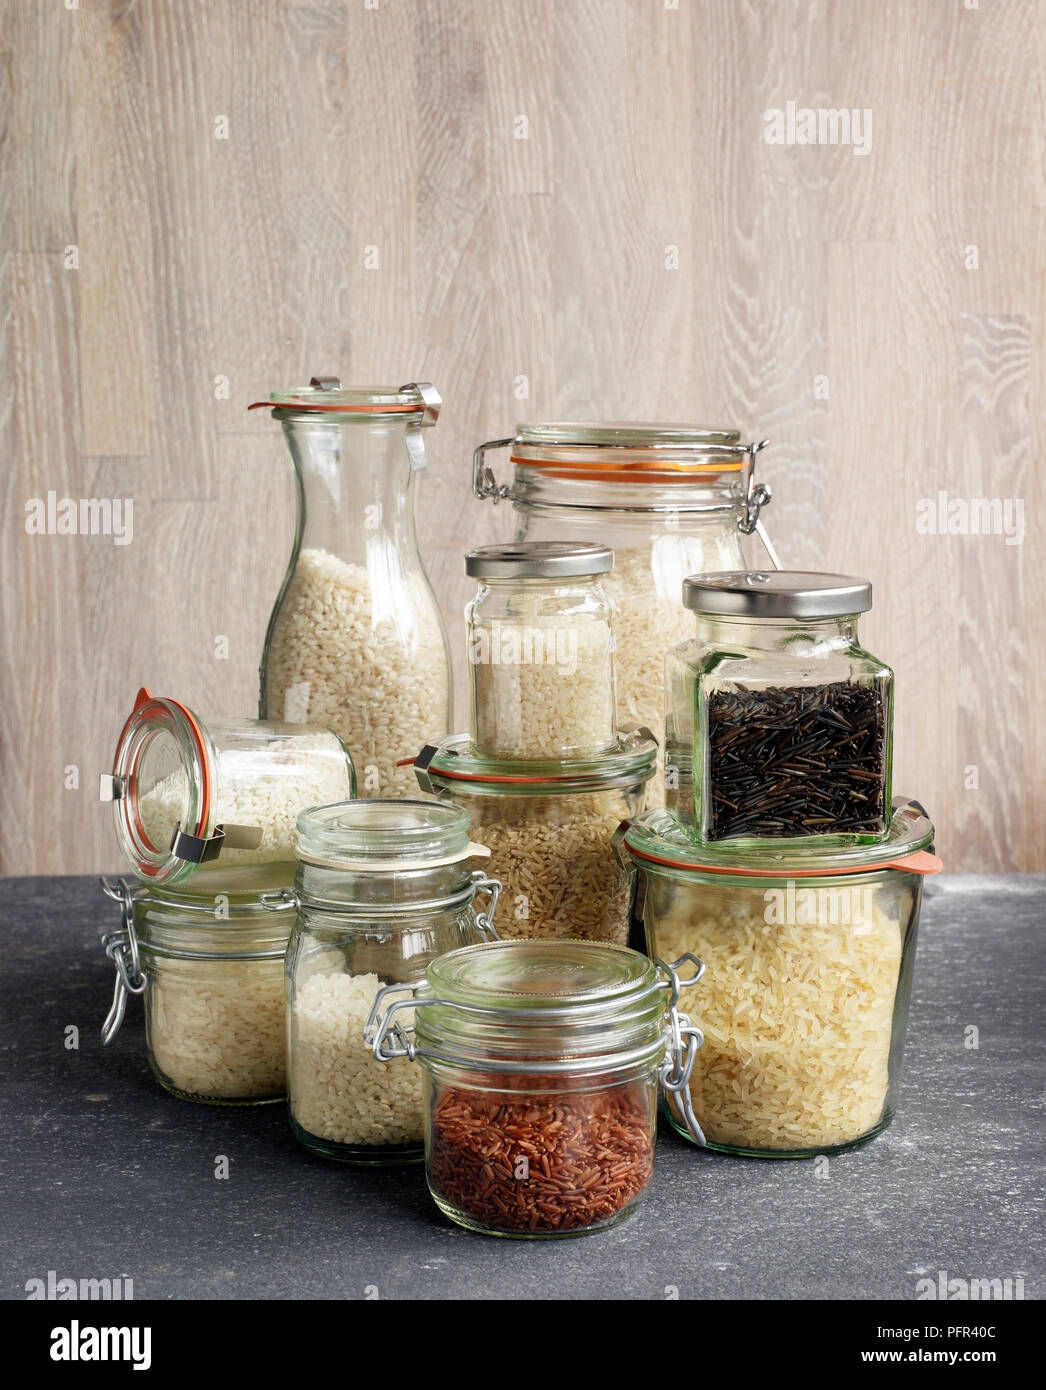 Jars containing different types of rice, risotto rice, basmati rice, sushi rice, sticky rice, brown rice, wild rice, jasmine rice, pudding rice, red rice (camargue rice), long-grain rice Stock Photo